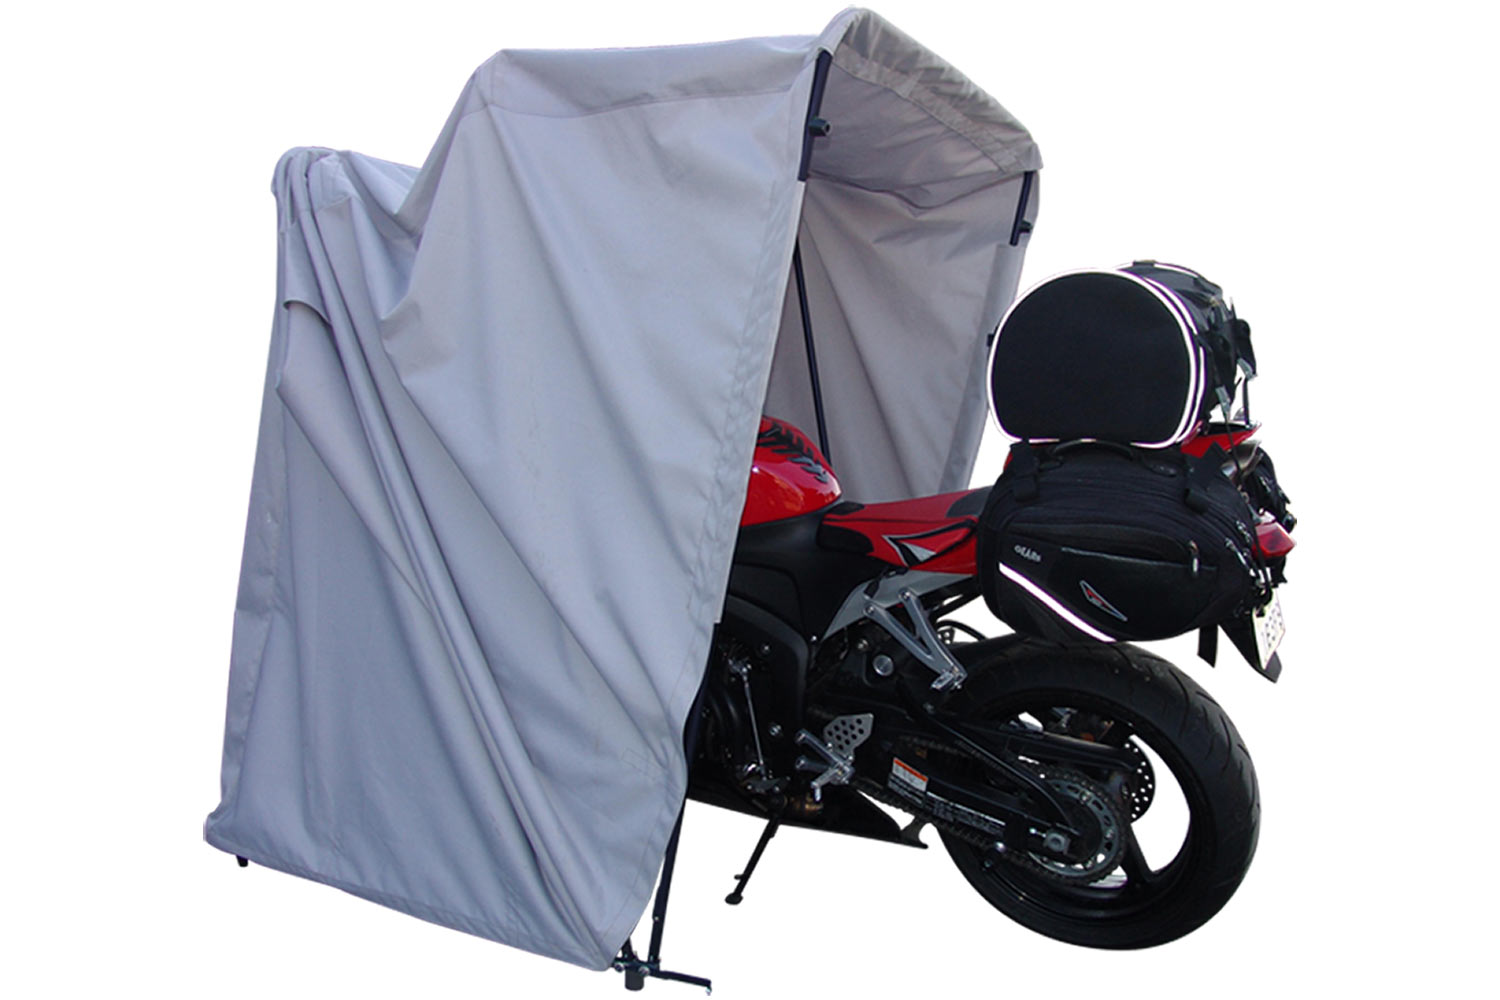 Pro-Shelter Garage for Motorcycle, ATV,  Snowmobile • GEARS